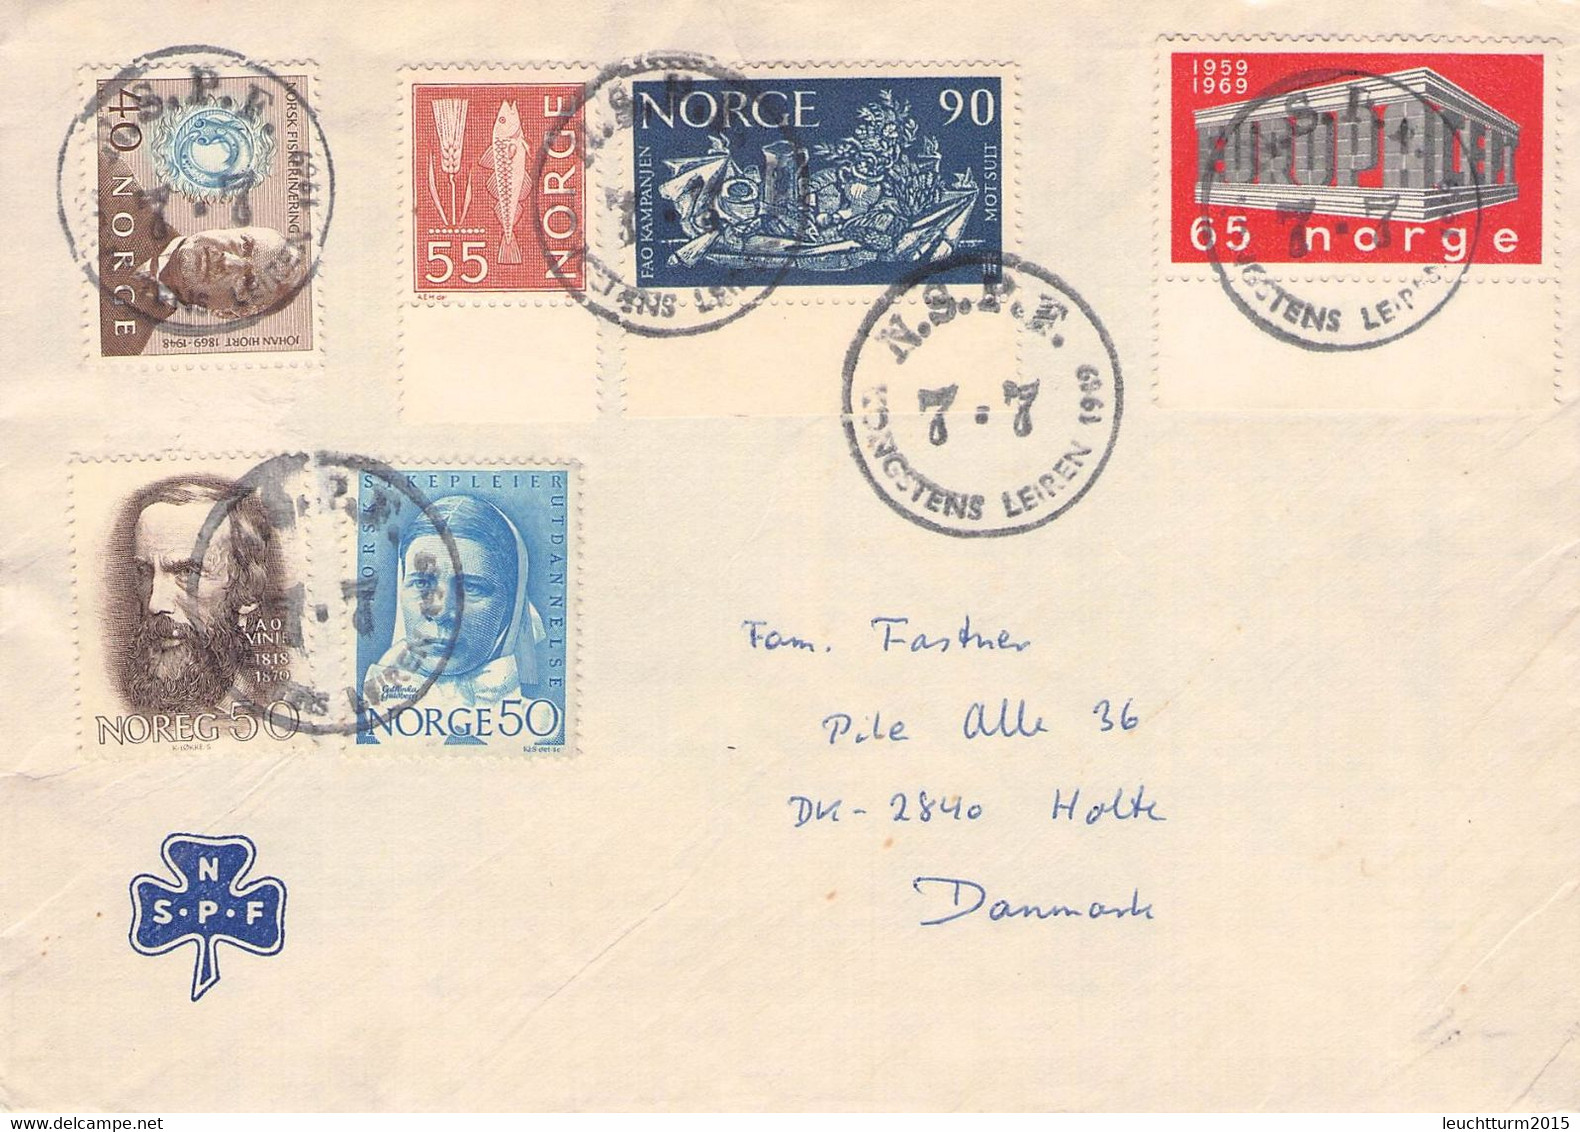 NORWAY - SCOUT SCOOTING 1969 LETTER > HOLTE/DK //QE 235 - Covers & Documents